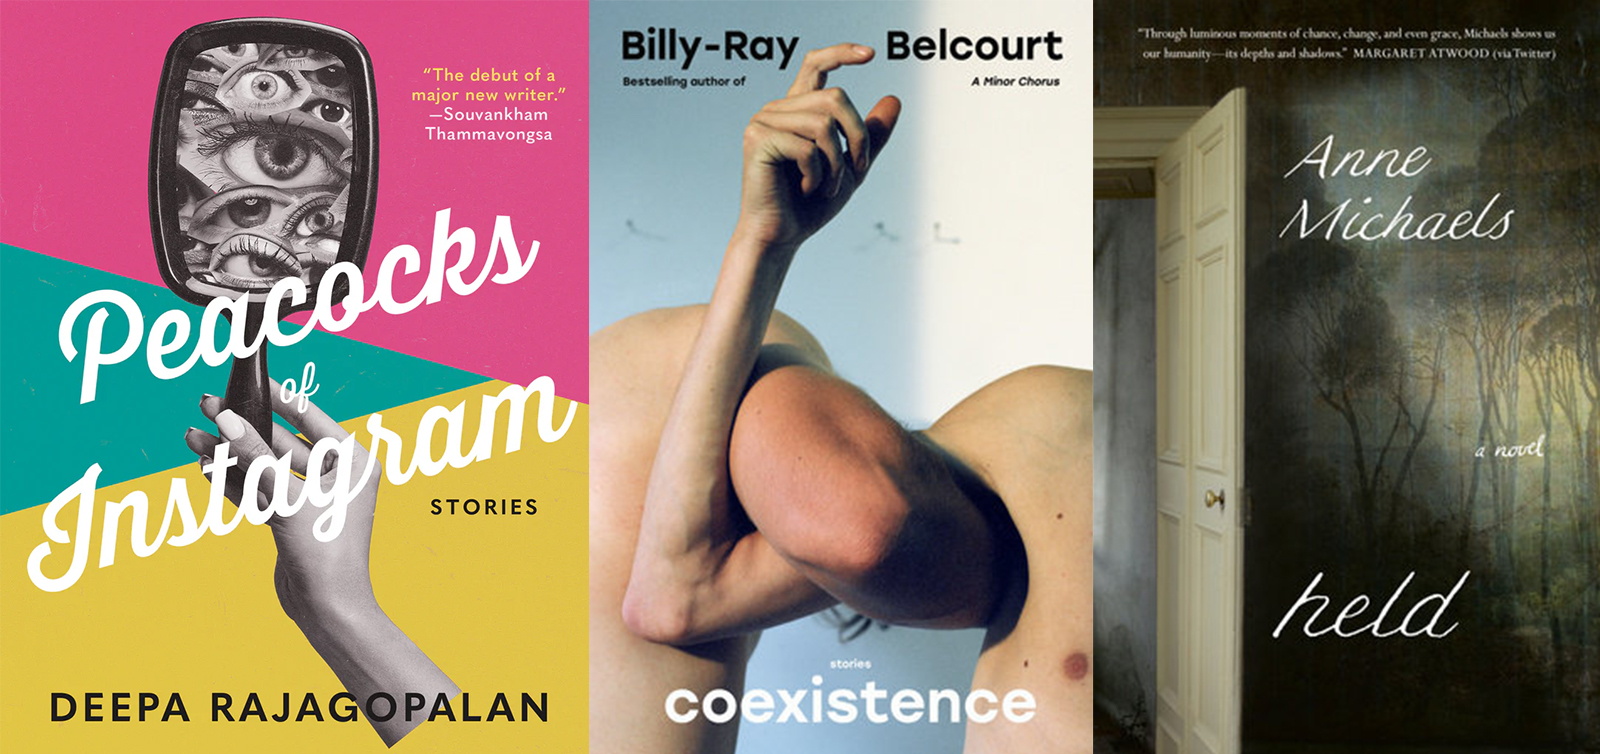 Three book covers, from left: 'Peacocks of Instagram' by Deepa Rajagopalan; 'Coexistence' by Billy-Ray Belcourt; 'Held' by Anne Michaels.